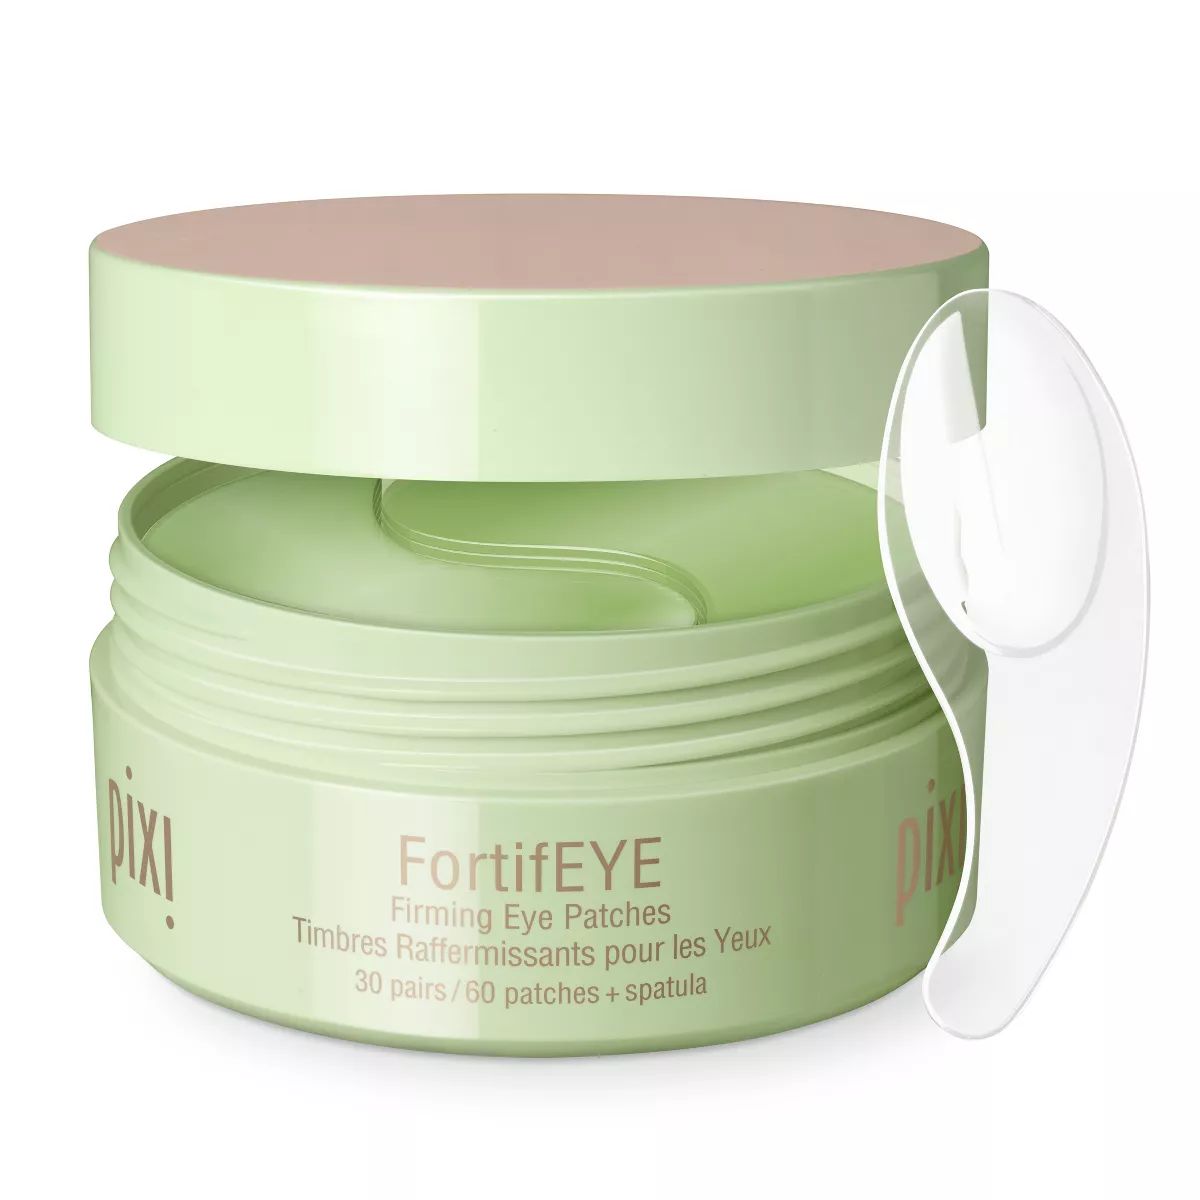 Pixi FortifEYE Toning Eye Patches with Collagen - 60ct | Target